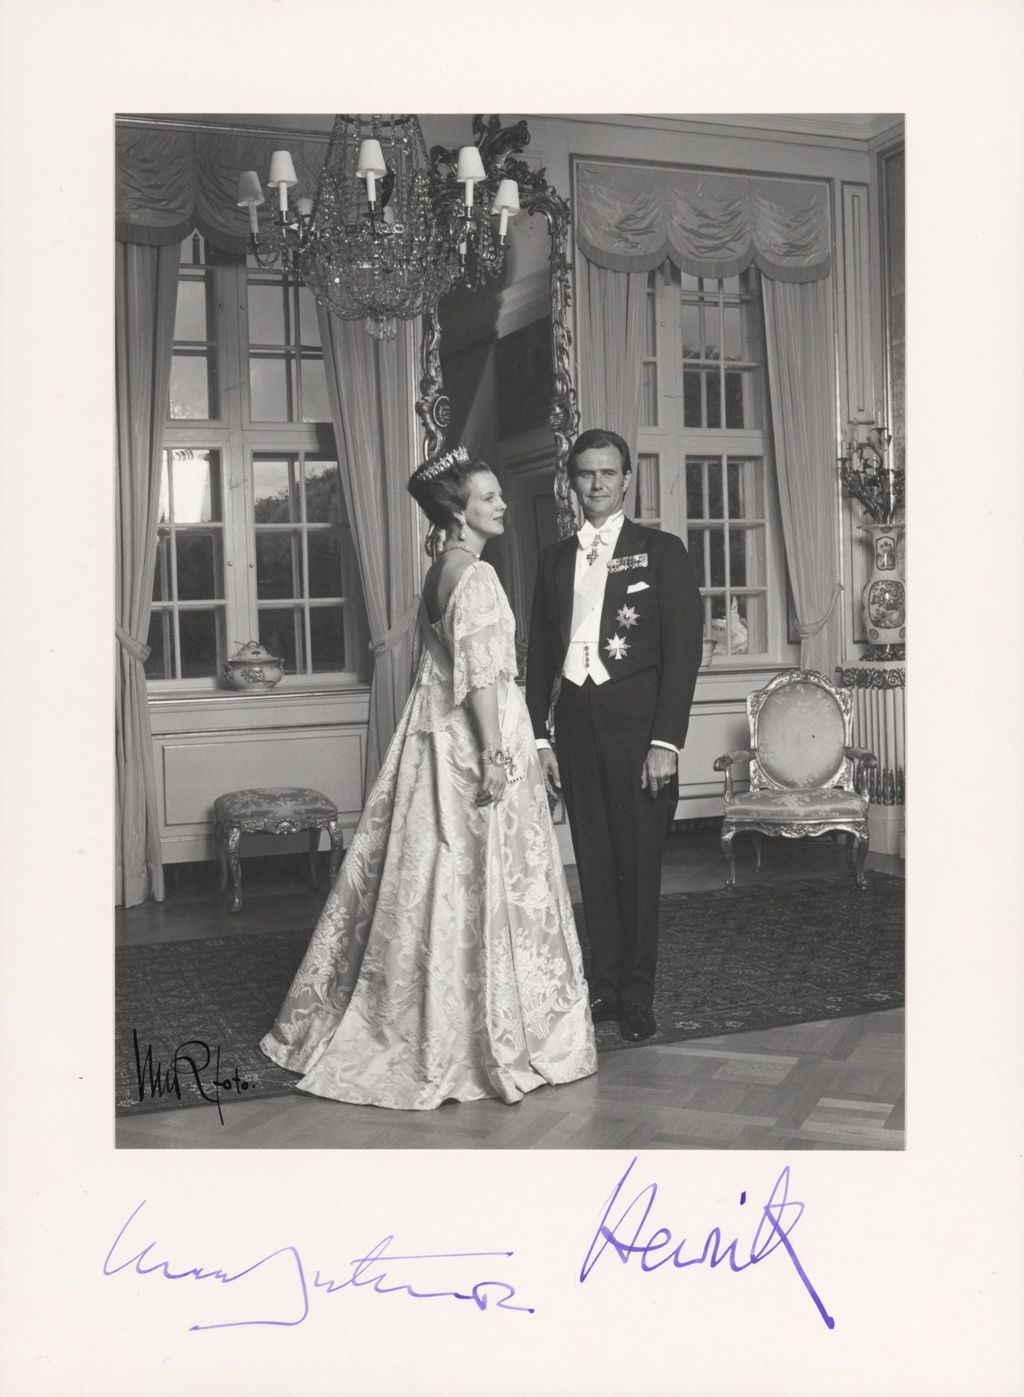 Miniature of Queen Margrethe II of Denmark and Prince Henrik